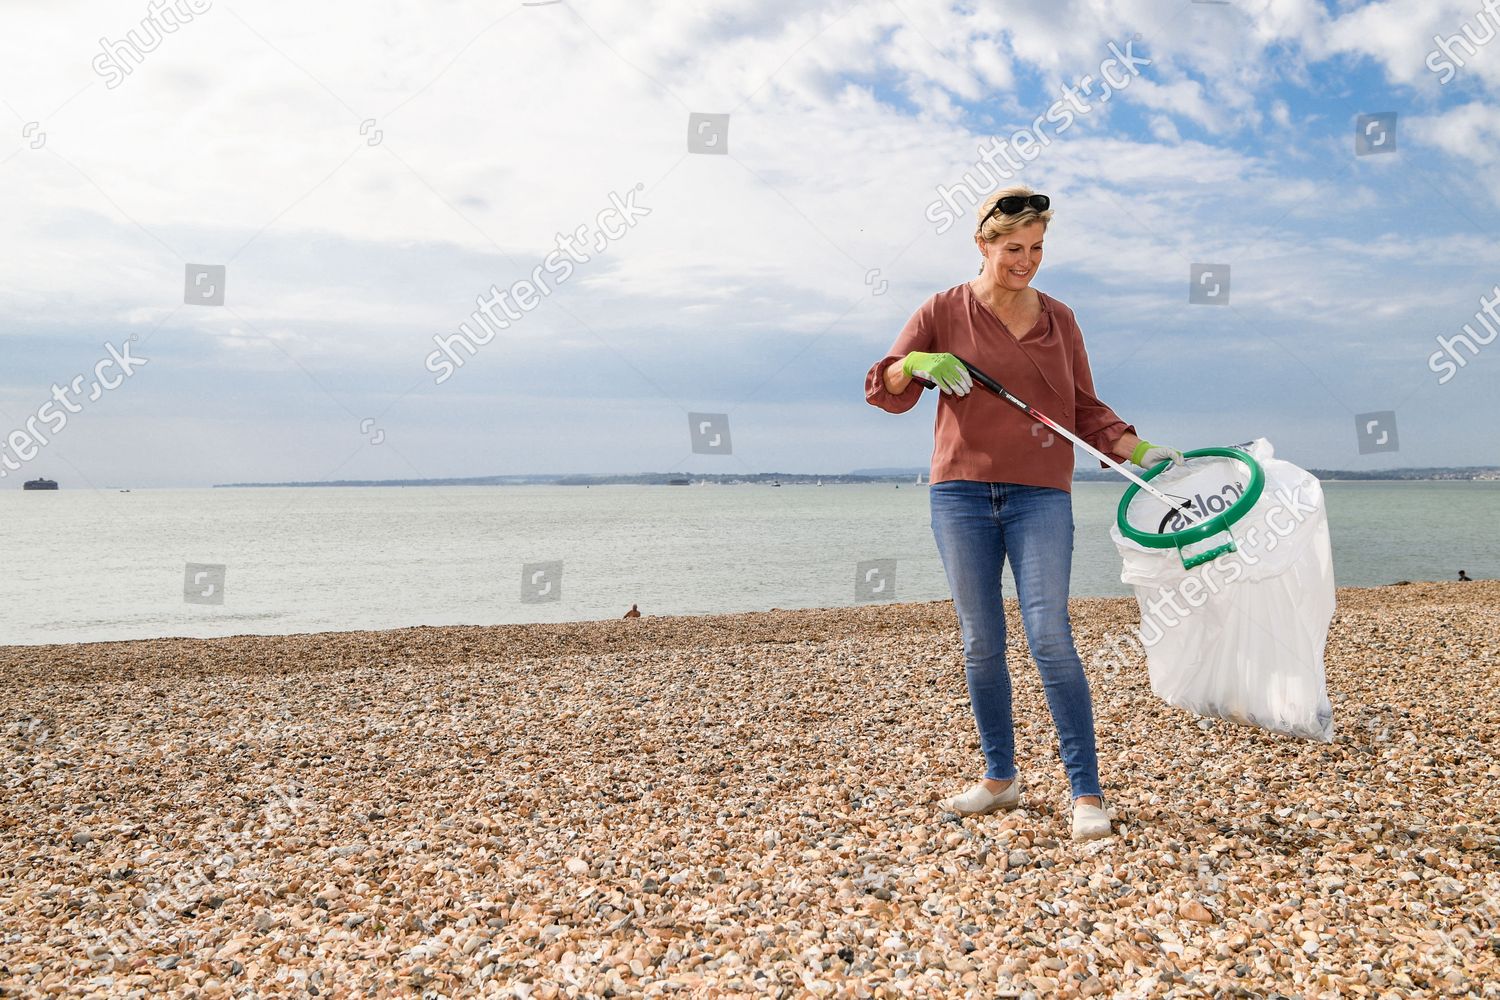 prince-edward-and-sophie-countess-of-wessex-great-british-beach-clean-southsea-beach-portsmouth-uk-shutterstock-editorial-10782998ai.jpg